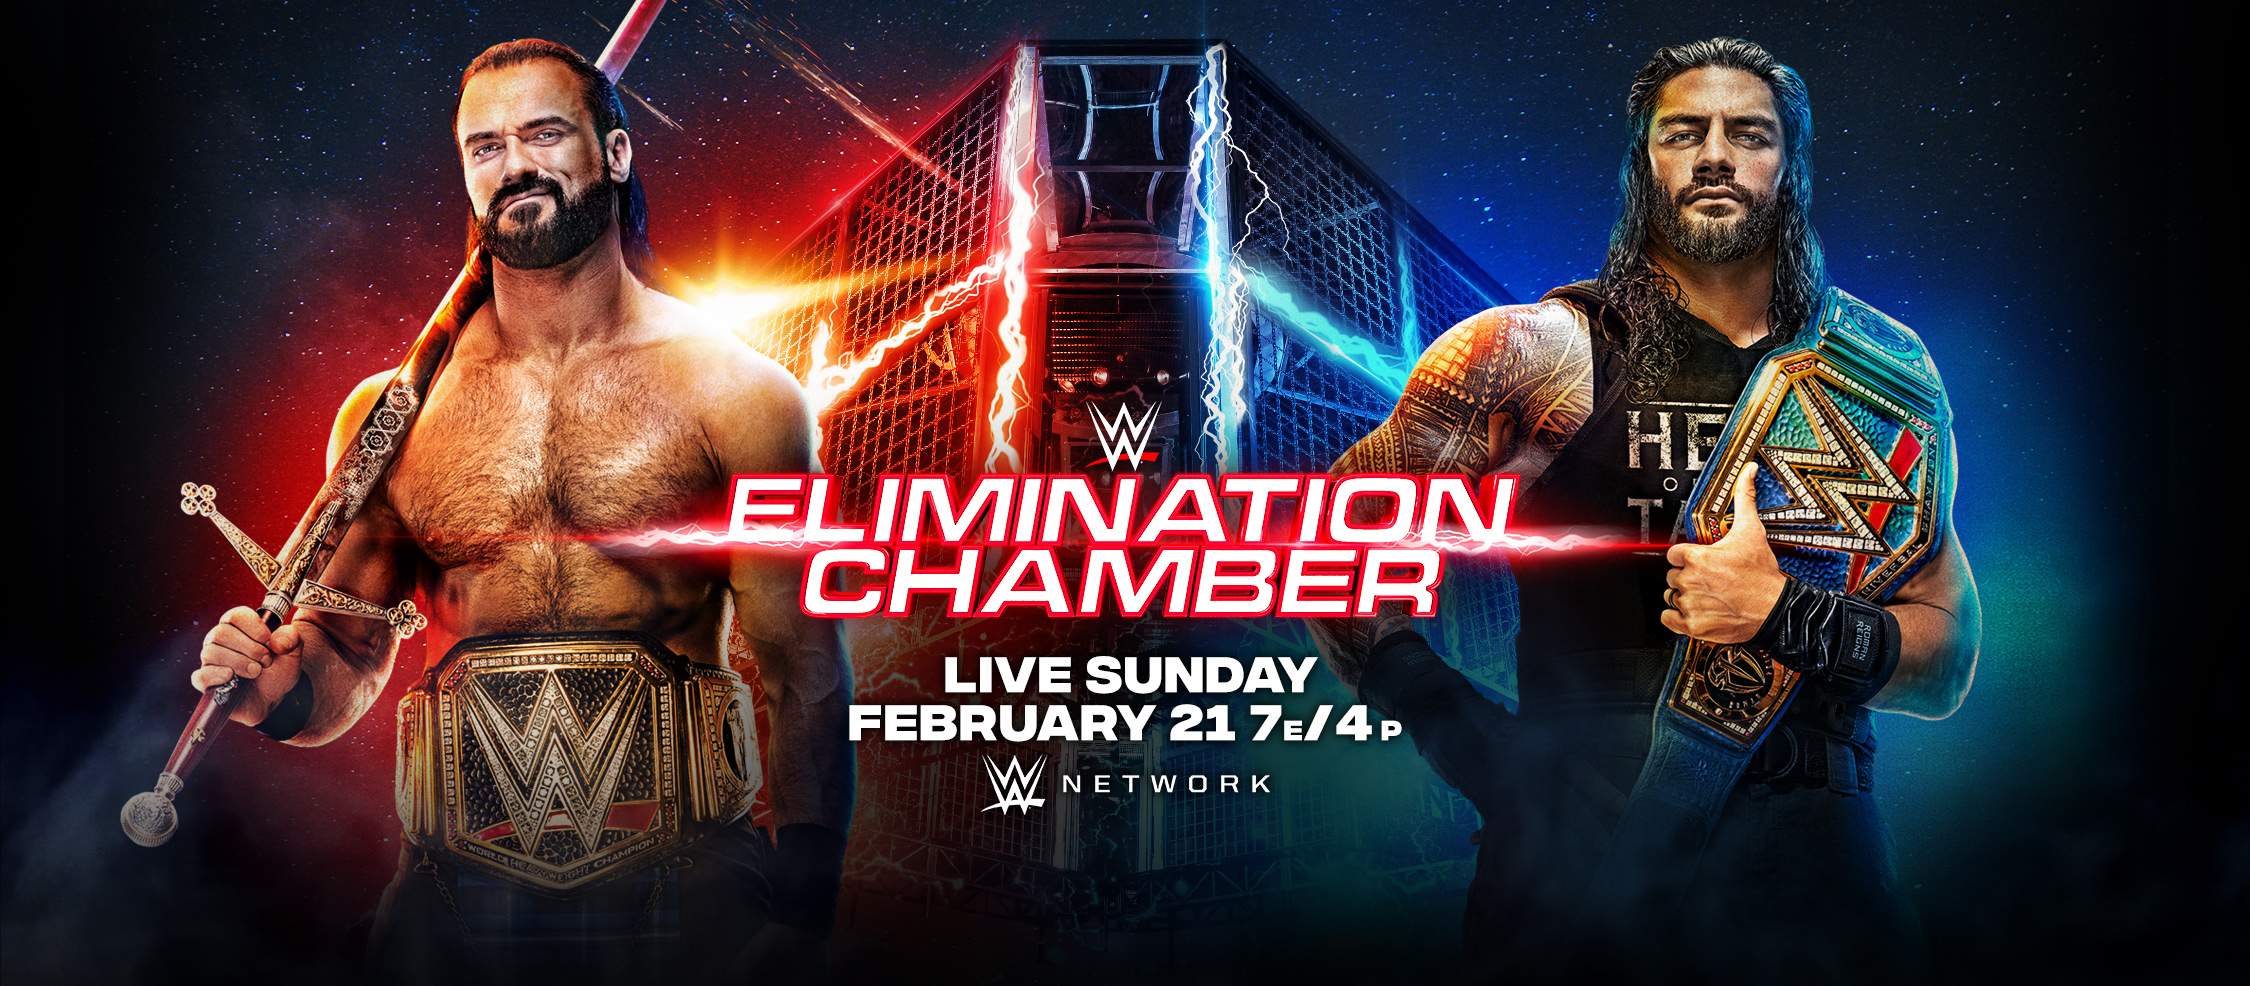 WWE ELIMINATION CHAMBER 2021 PREVIEW AND PREDICTIONS